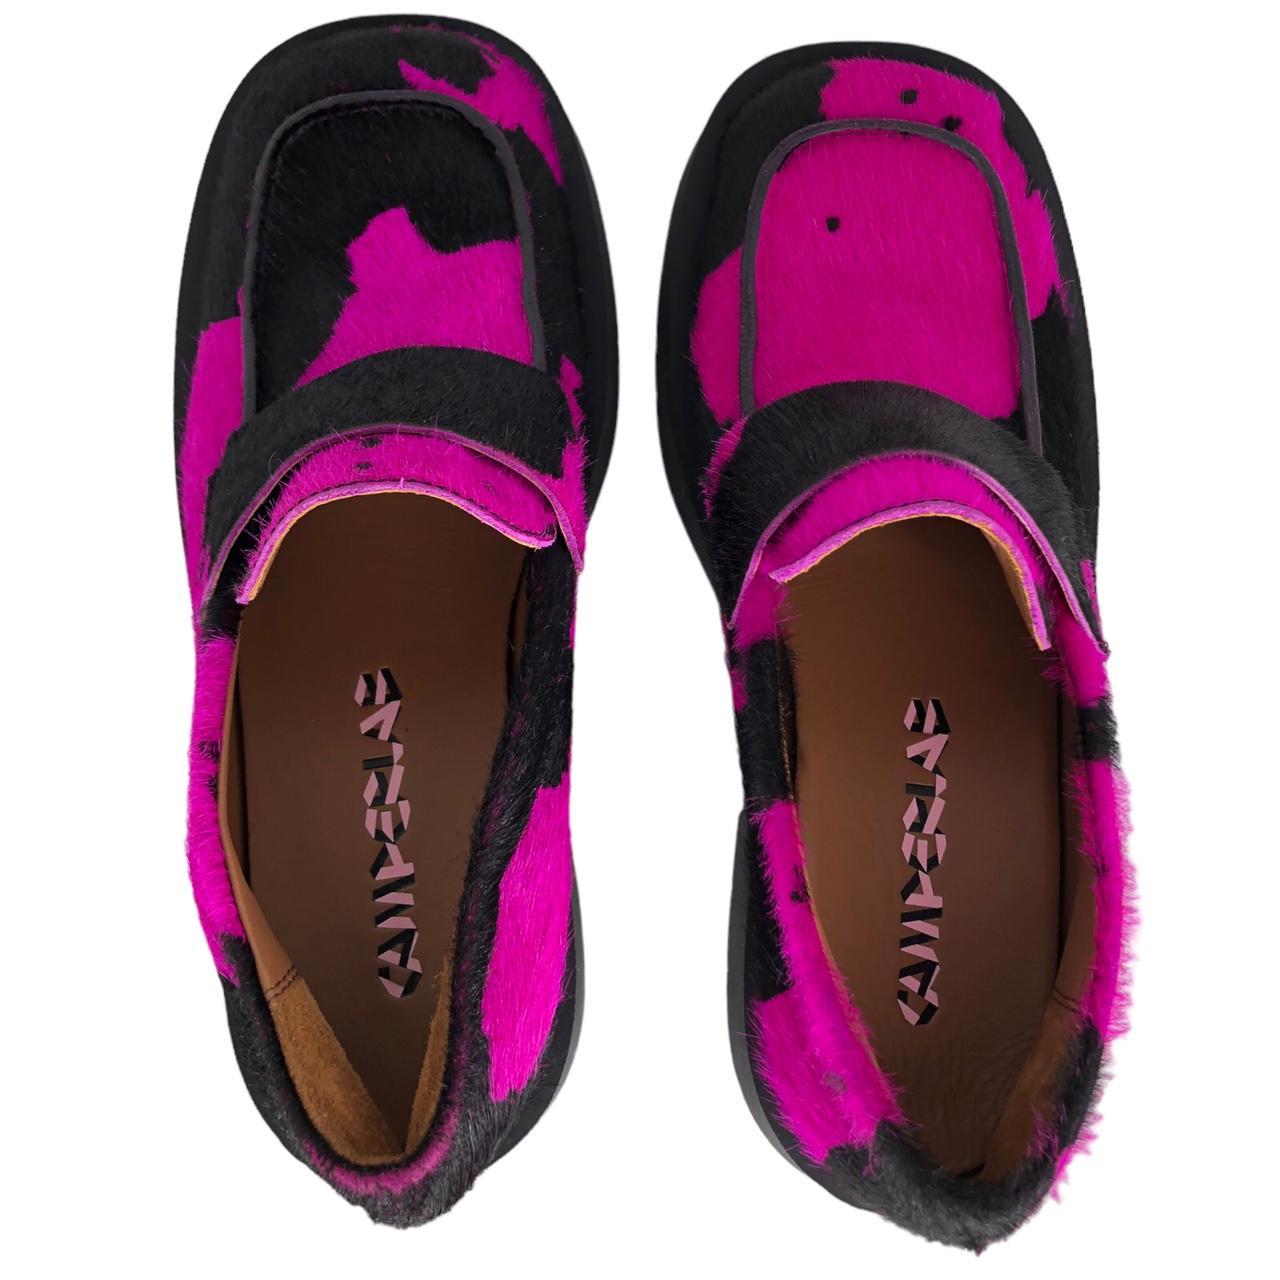 CamperLab Women's Pink and Black Loafers (7)